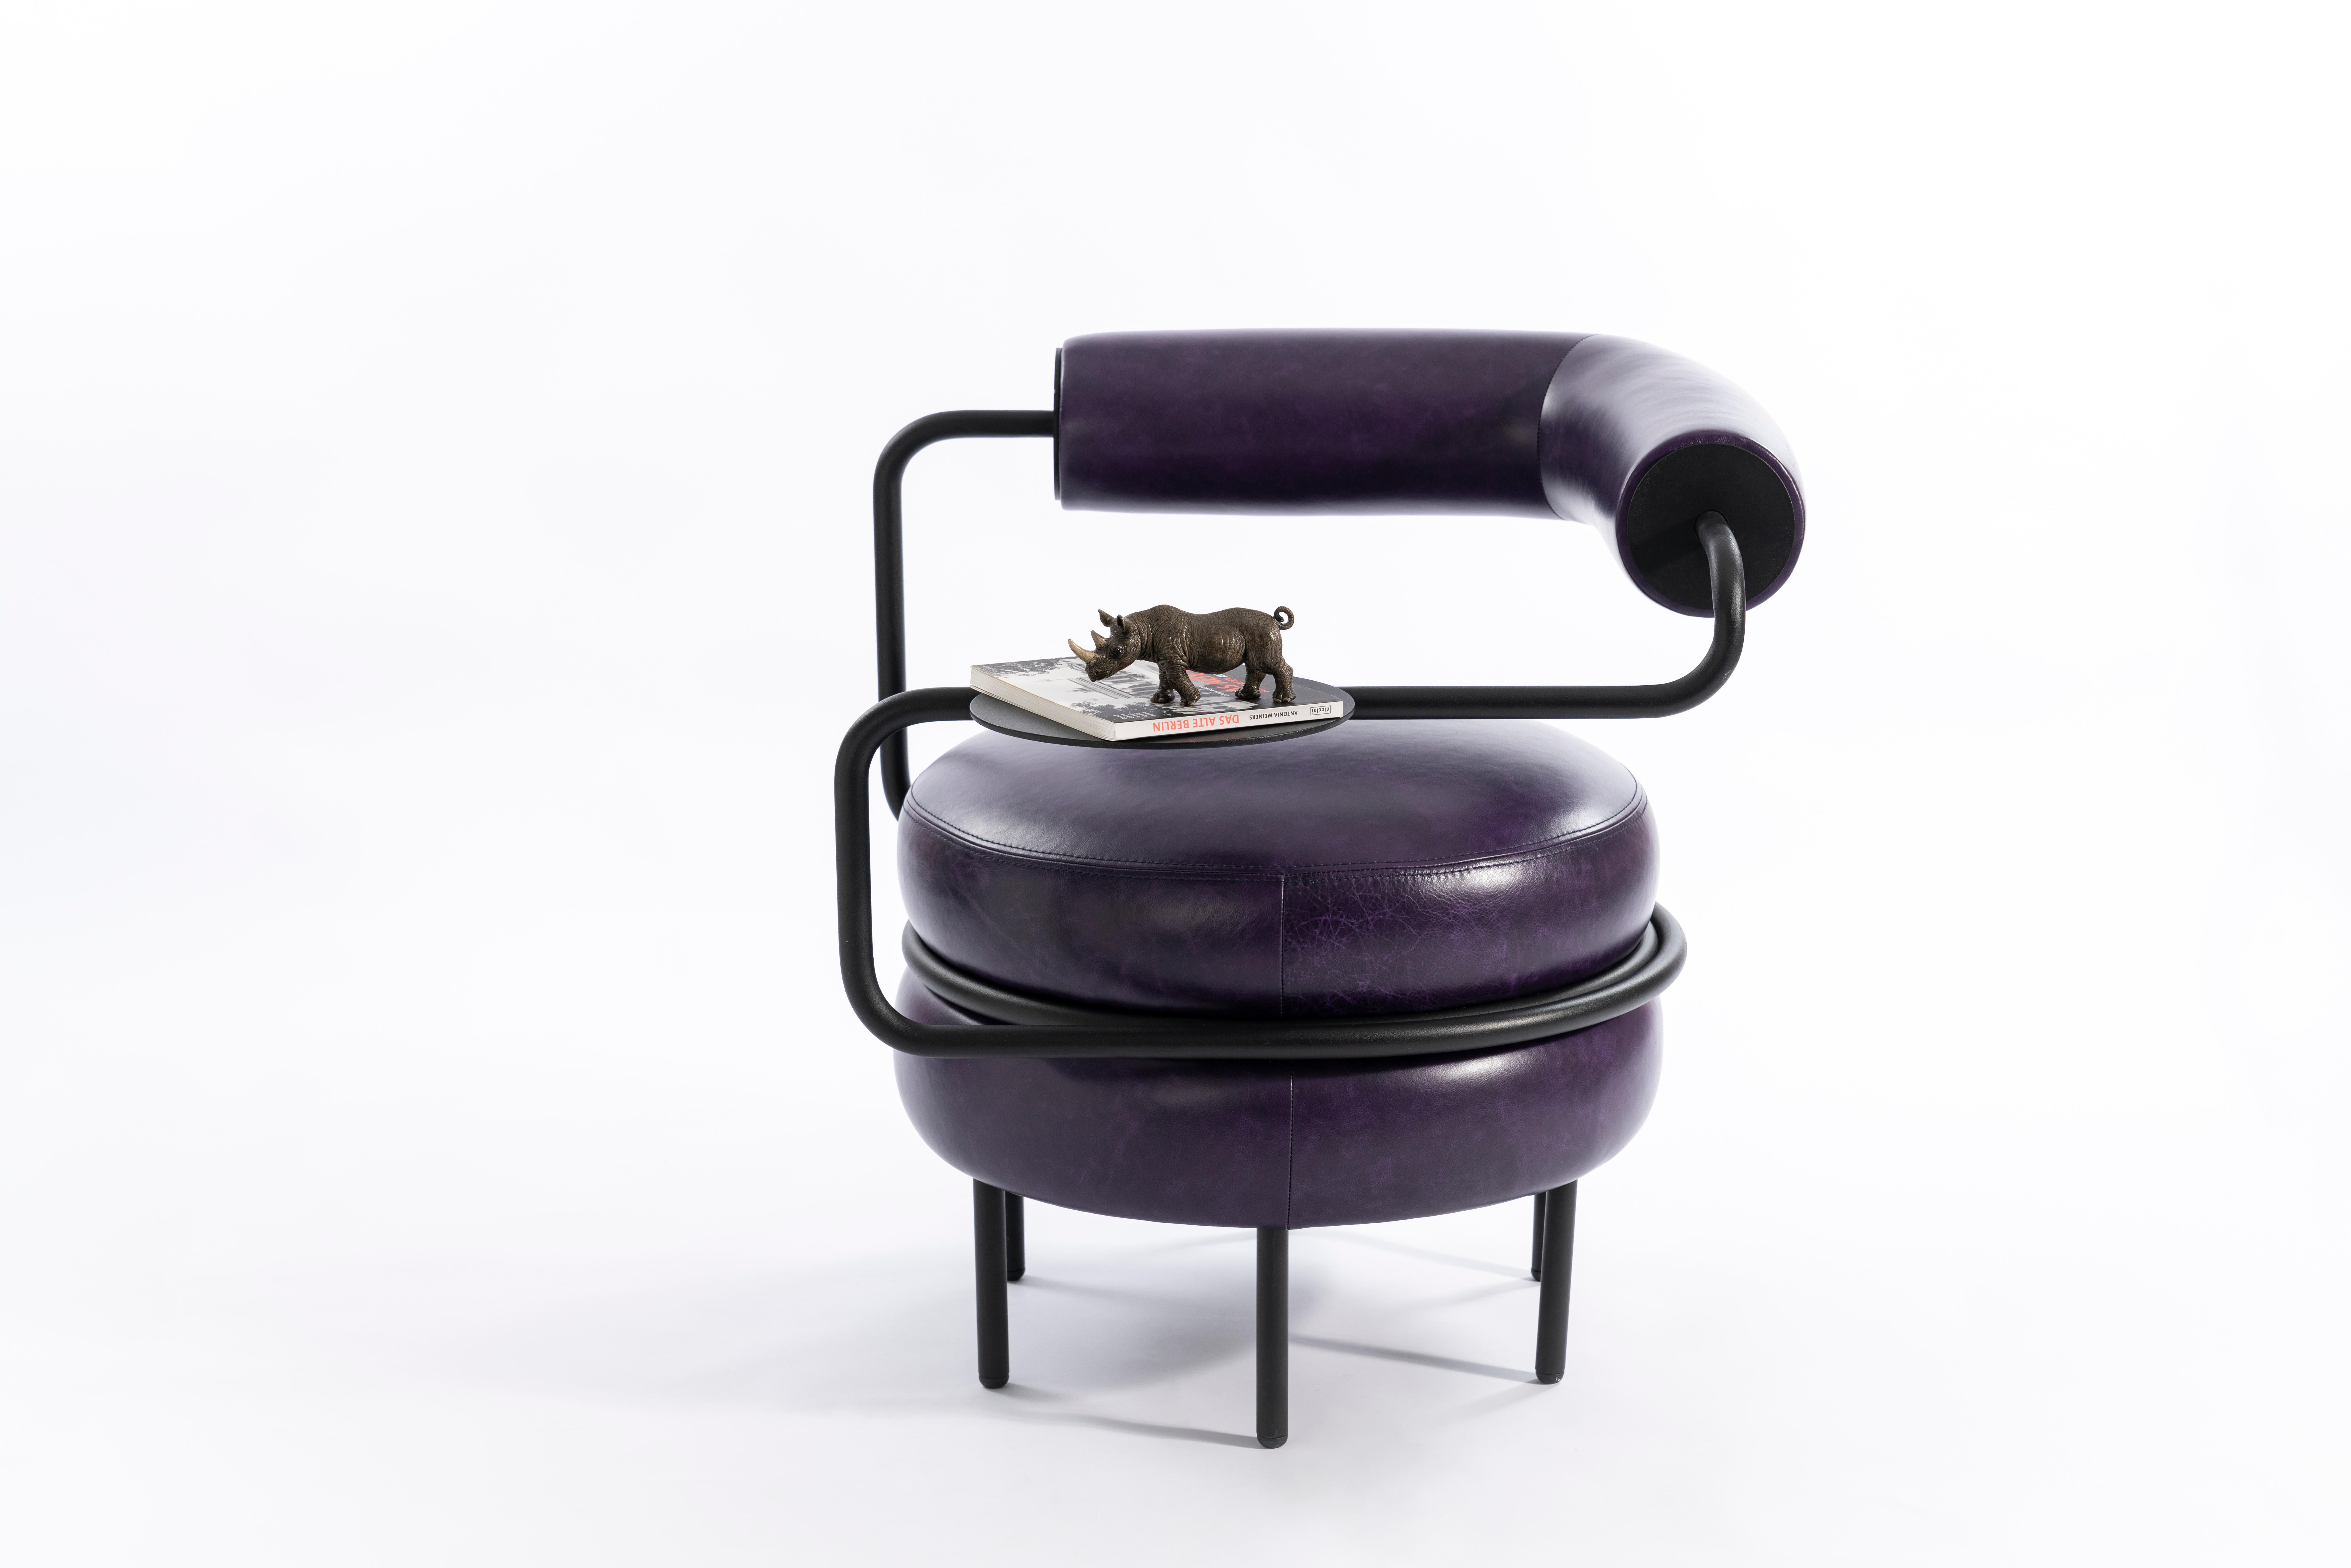 Kontra's interpretation of Macaron. Comfortable purple armchair.
One-armed leather chair provides comfortable seating with a side table of its own.